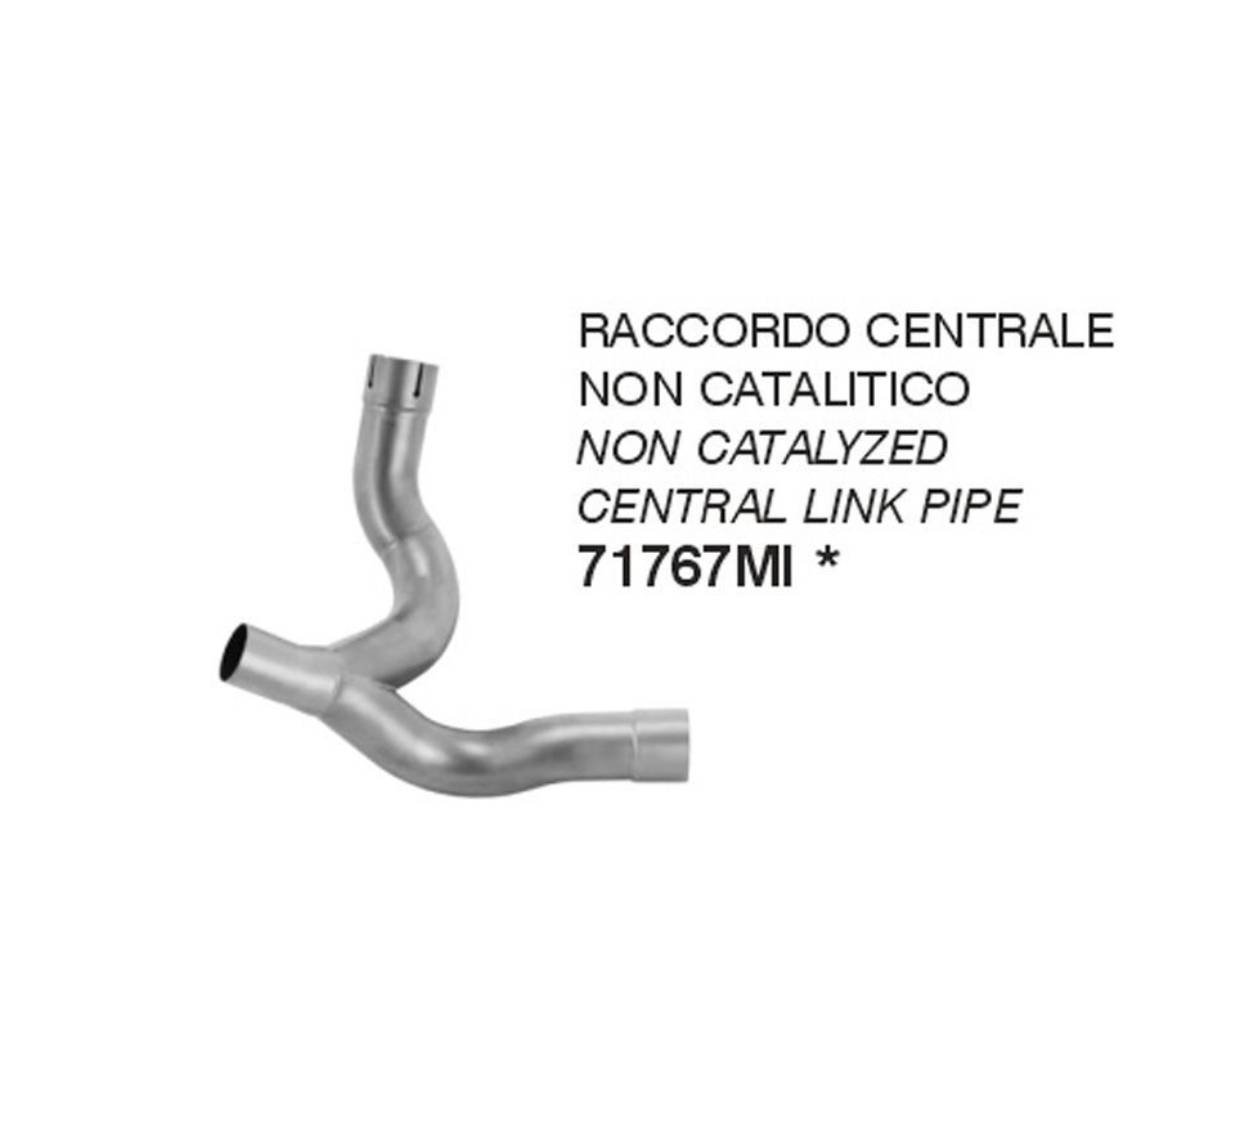 ARROW NON CATELYZED CENTRAL LINK PIPE DUCATI MONSTER 937 HEADER